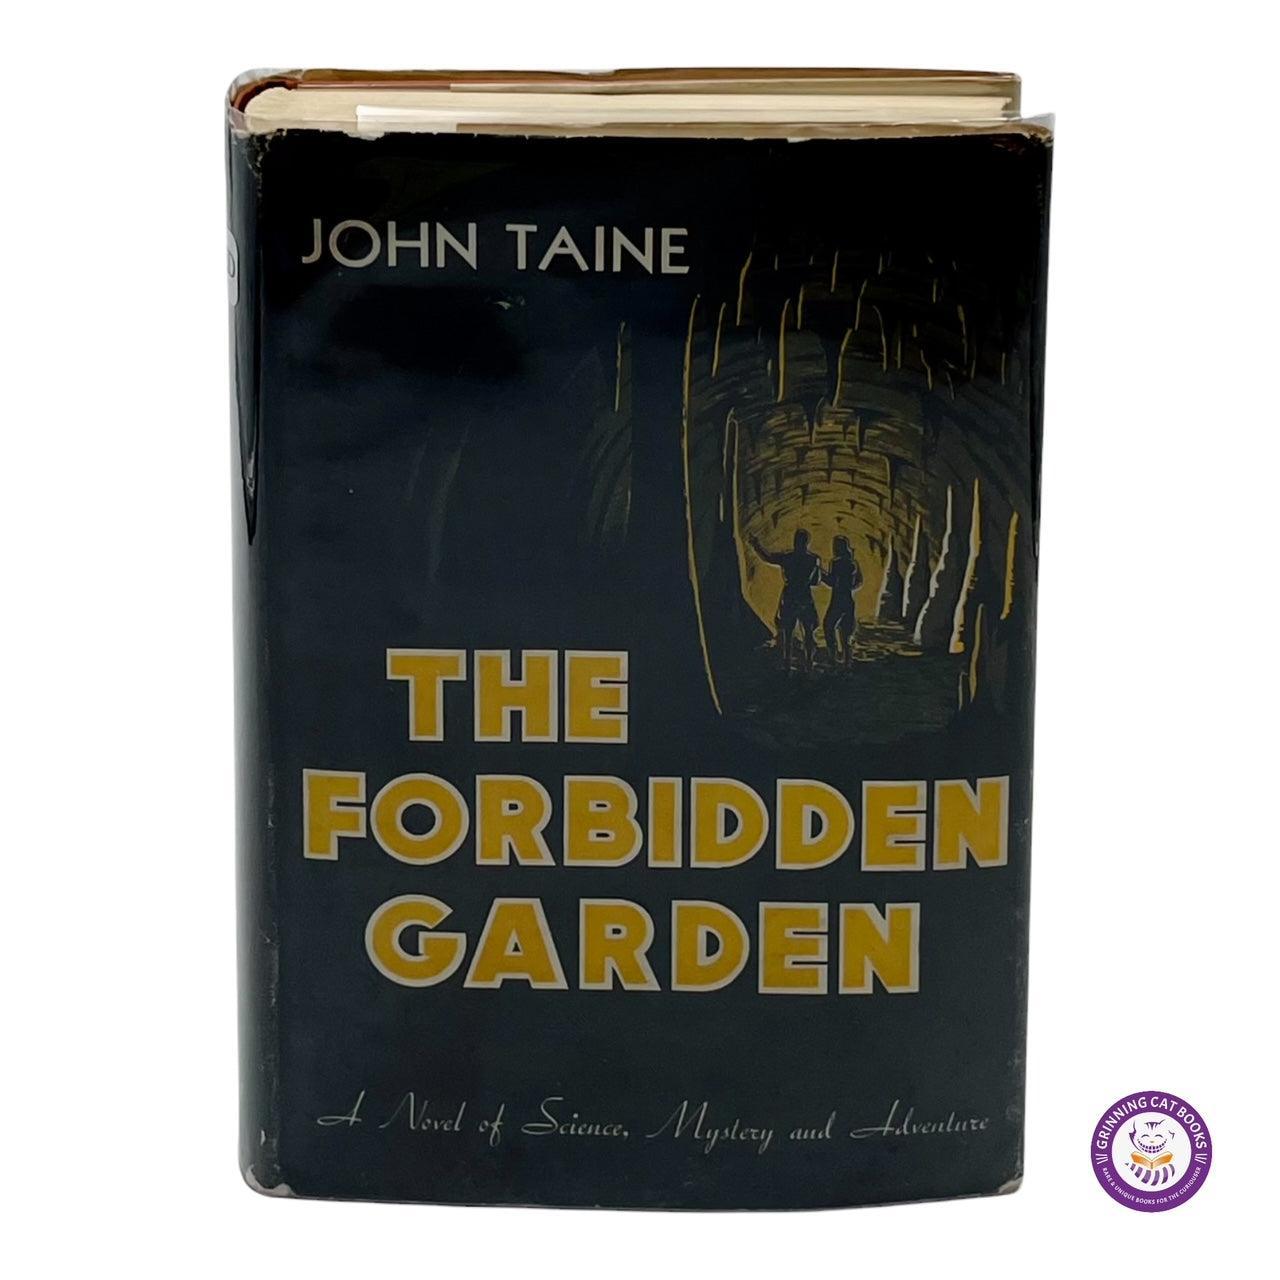 The Forbidden Garden (signed by Eric Taine Bell) - Grinning Cat Books - SCIENCE FICTION - FANTASY, SCIENCE FICTION, SIGNED